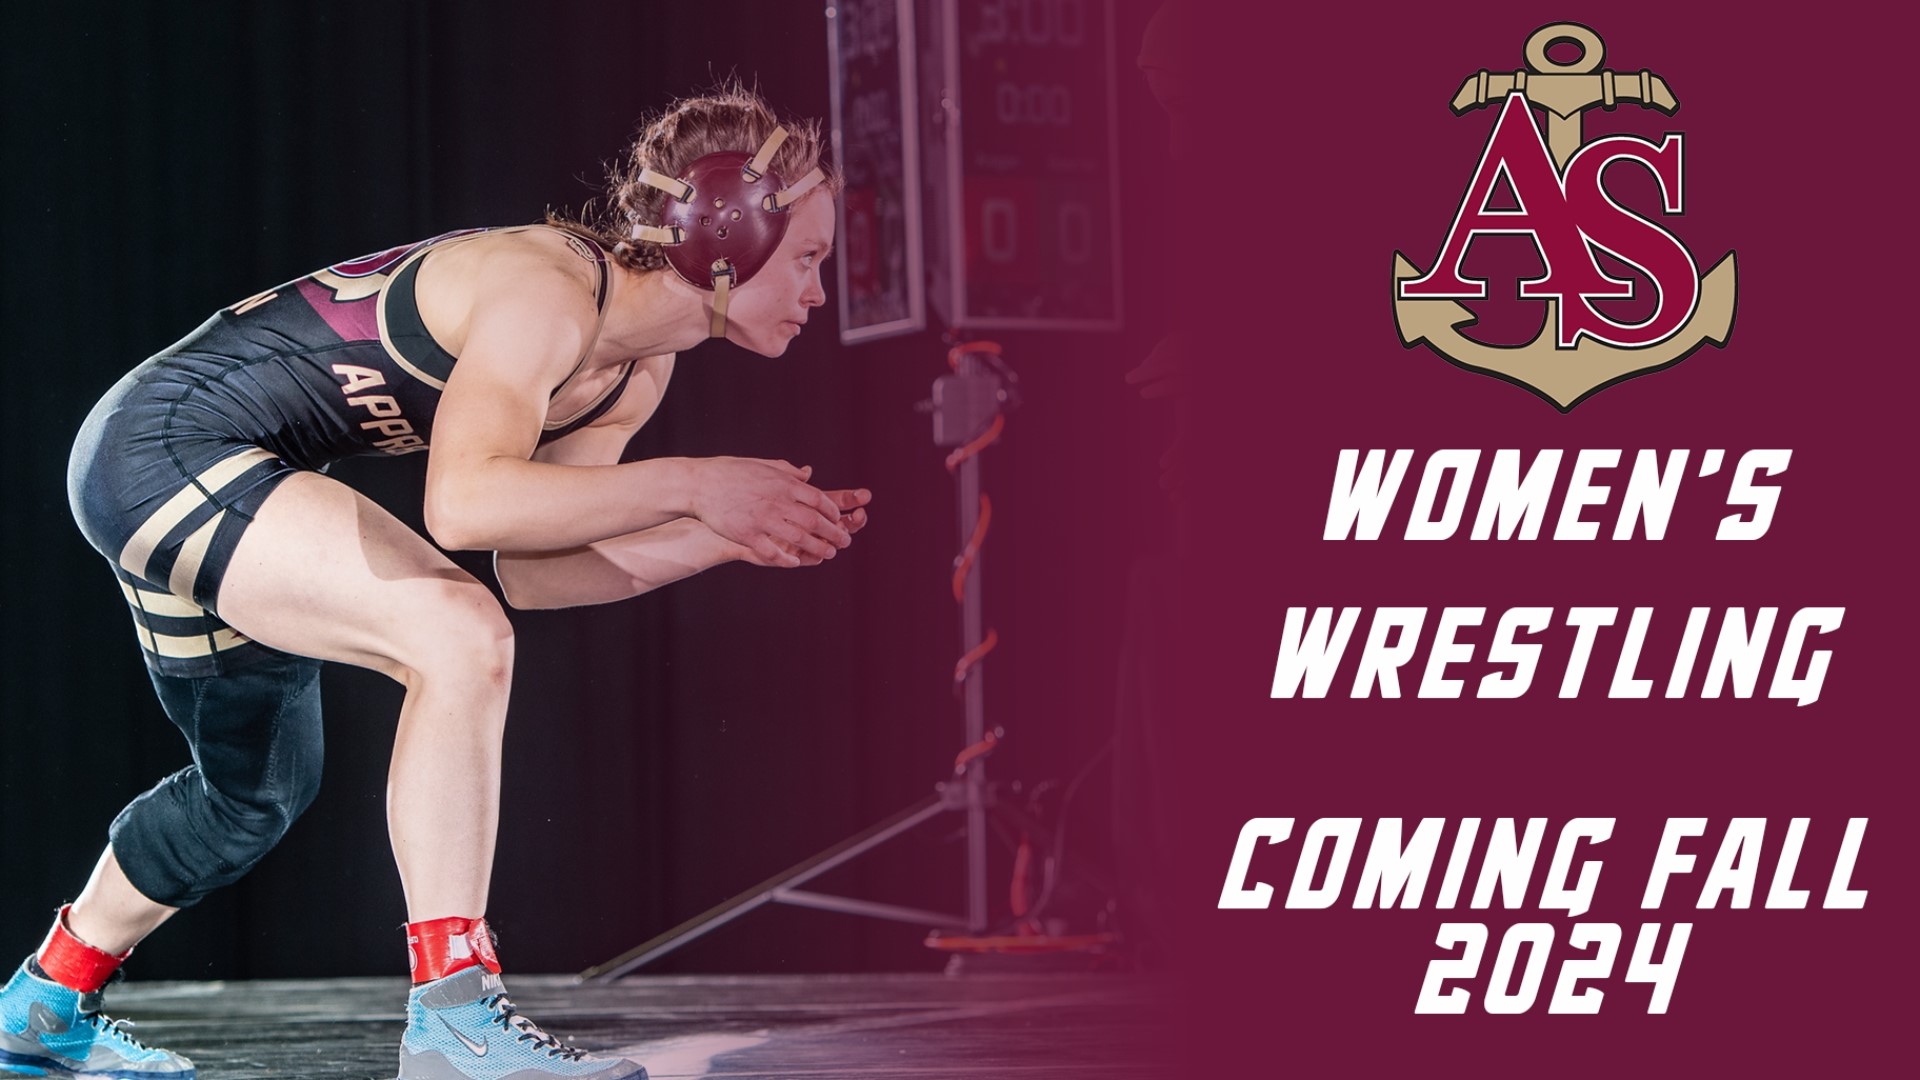 It is now the only college wrestling program in the Hampton Roads area for both men's and women's wrestling.